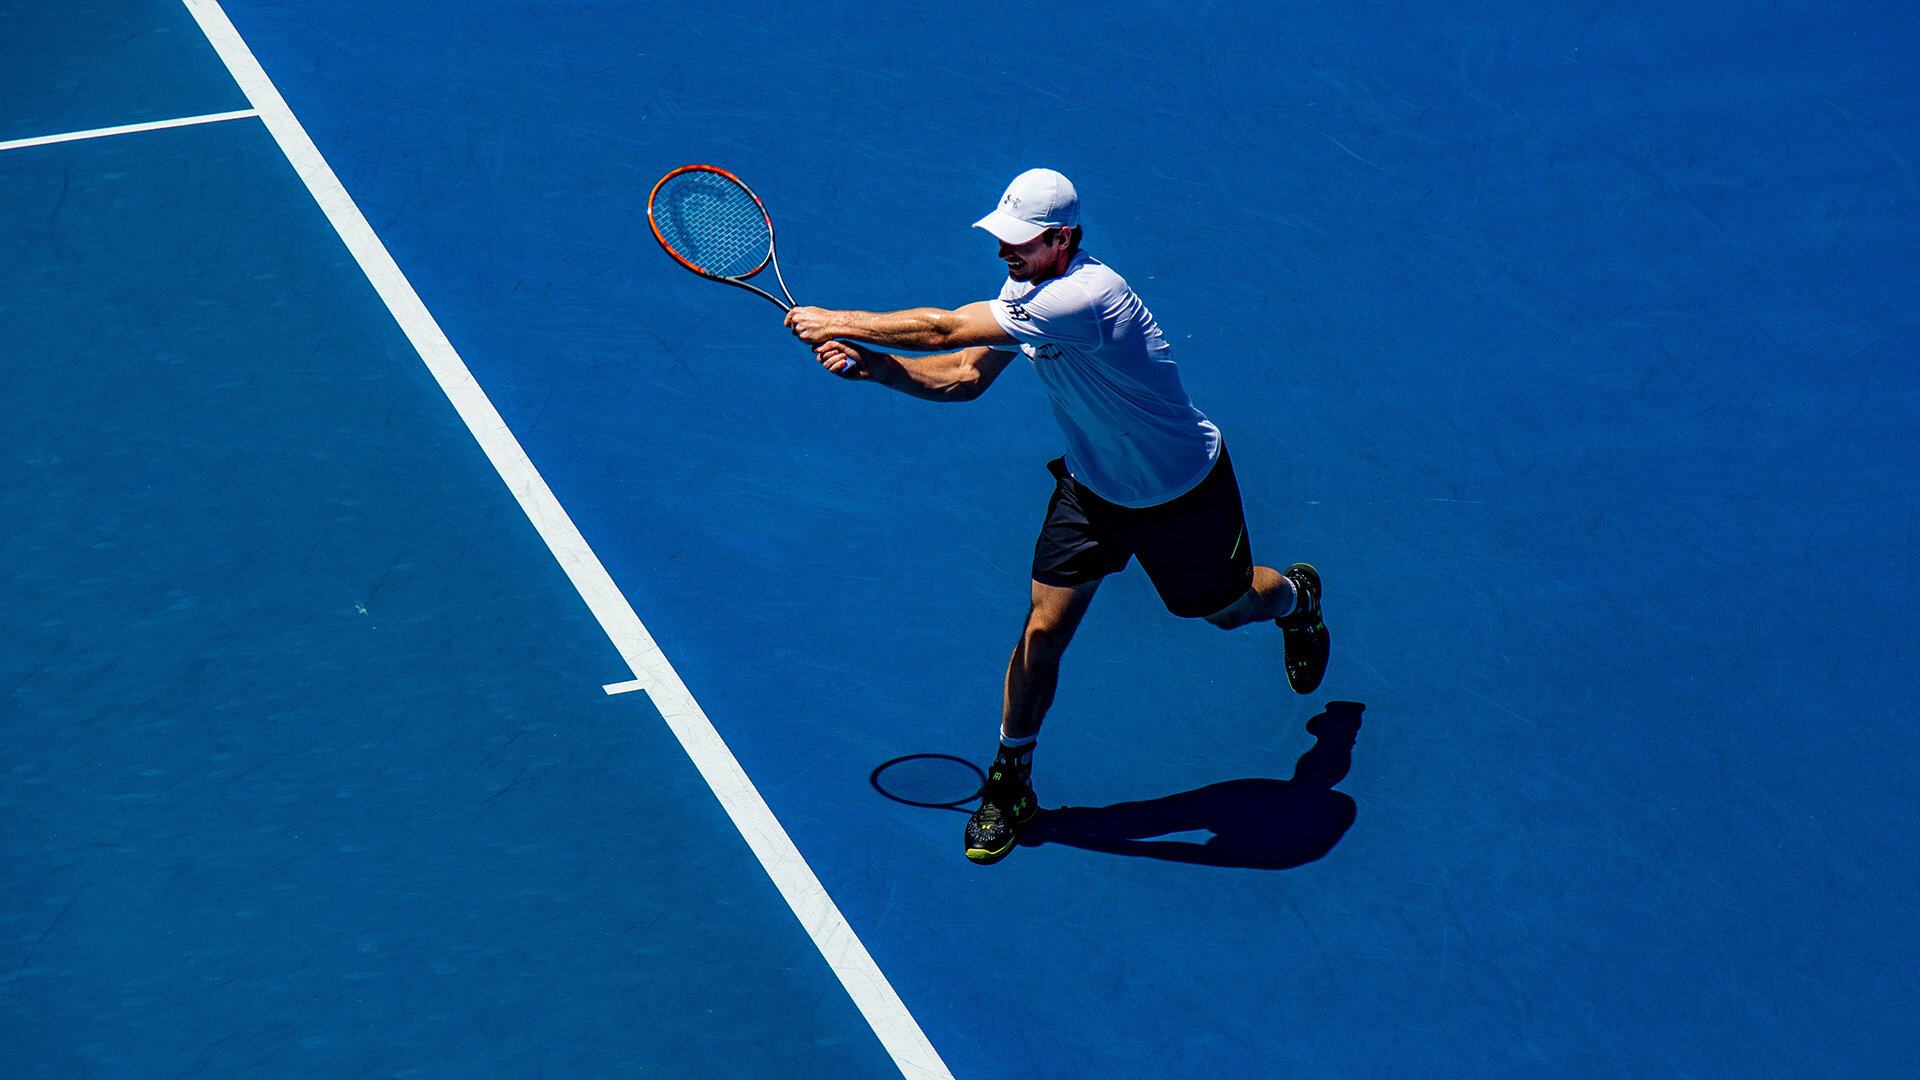 Tennis elbow not just for athletes